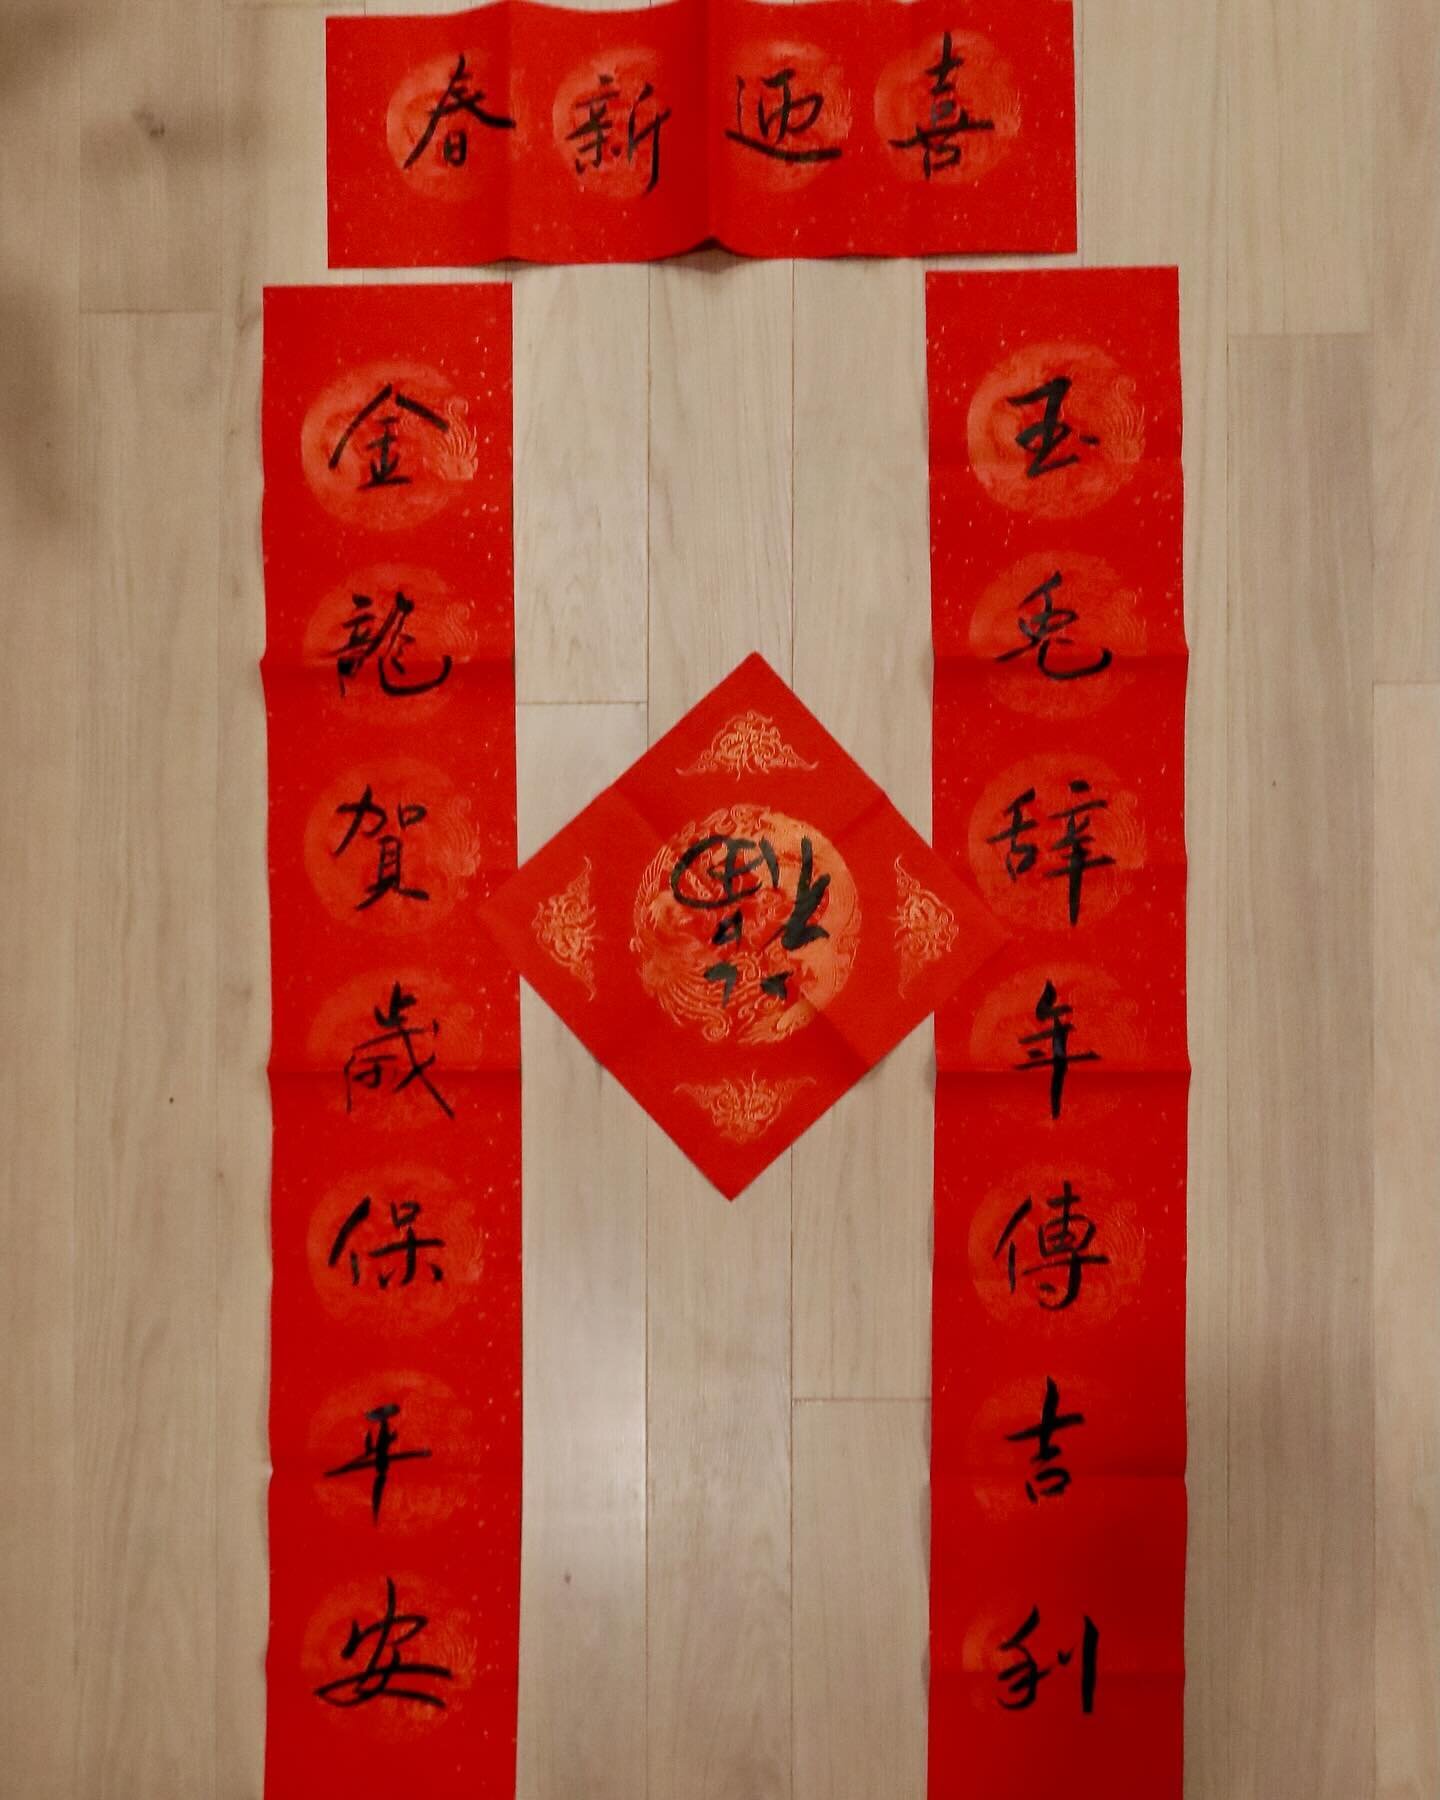 Happy new year, everyone!

2024 is also the Year of the Dragon 🐲 in the Lunar calendar!  A treasured Lunar New Year tradition is &ldquo;chunlian,&rdquo; with homes and businesses showcasing beautifully crafted calligraphy couplets. These adorned ban